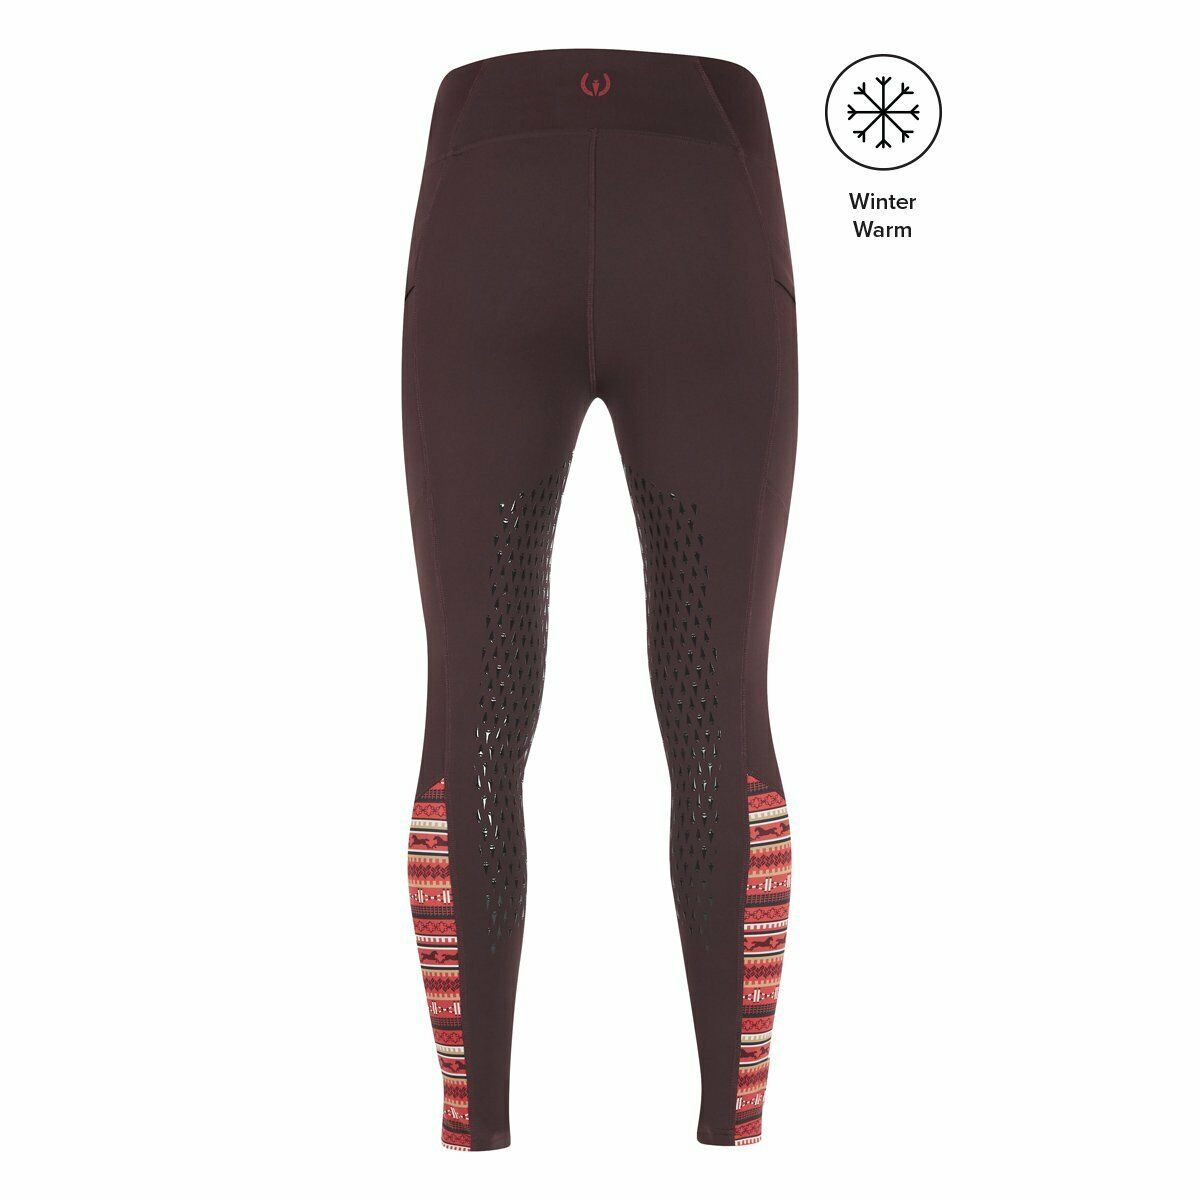 Kerrits® Ladies Thermo Tech Full Leg Fig Riding Tights 50270FIG